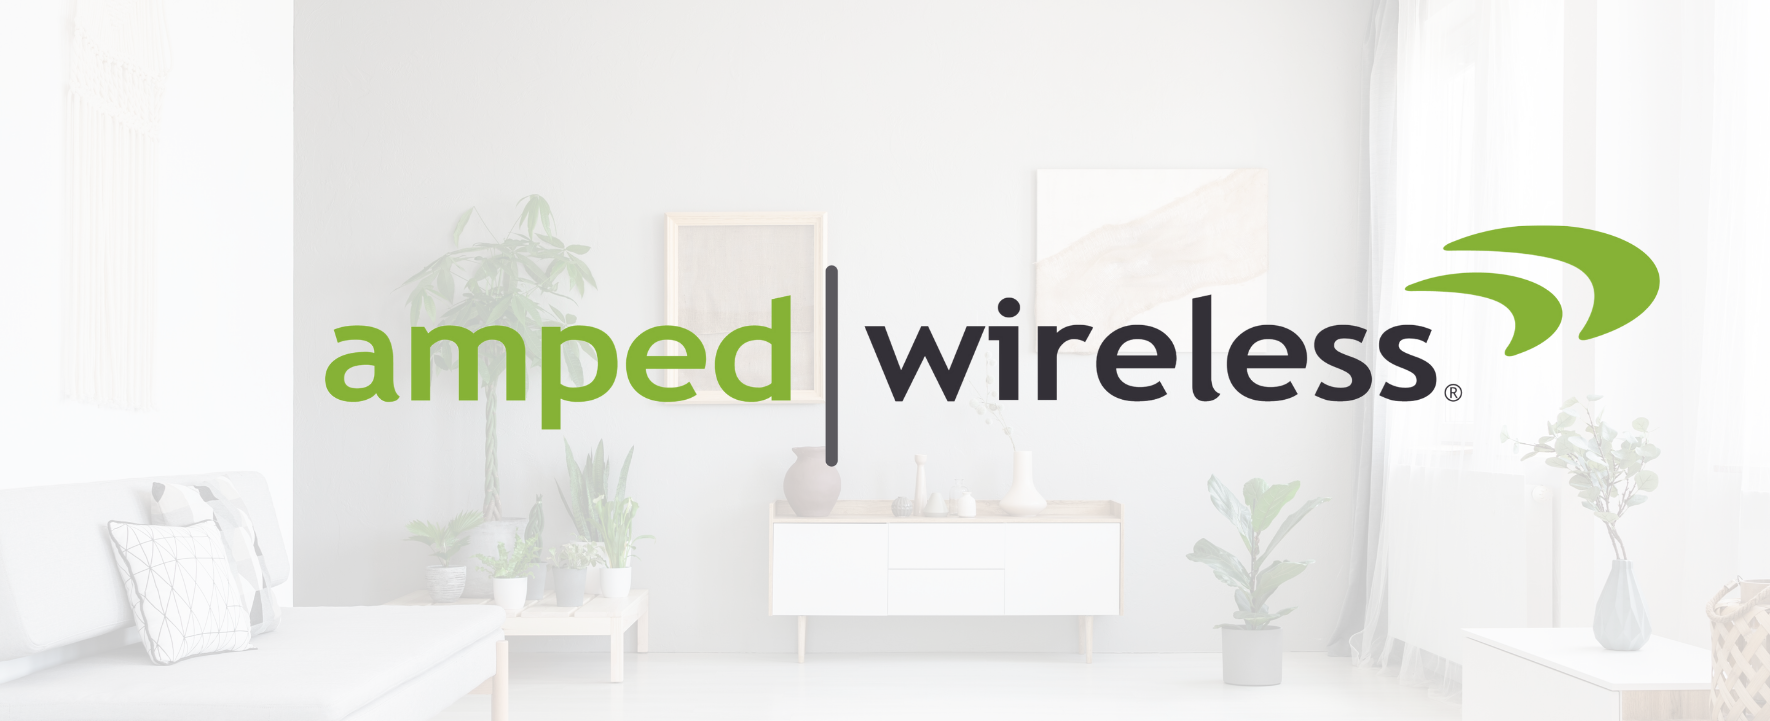 Amped Wireless Living Room with Amped Wireless Logo